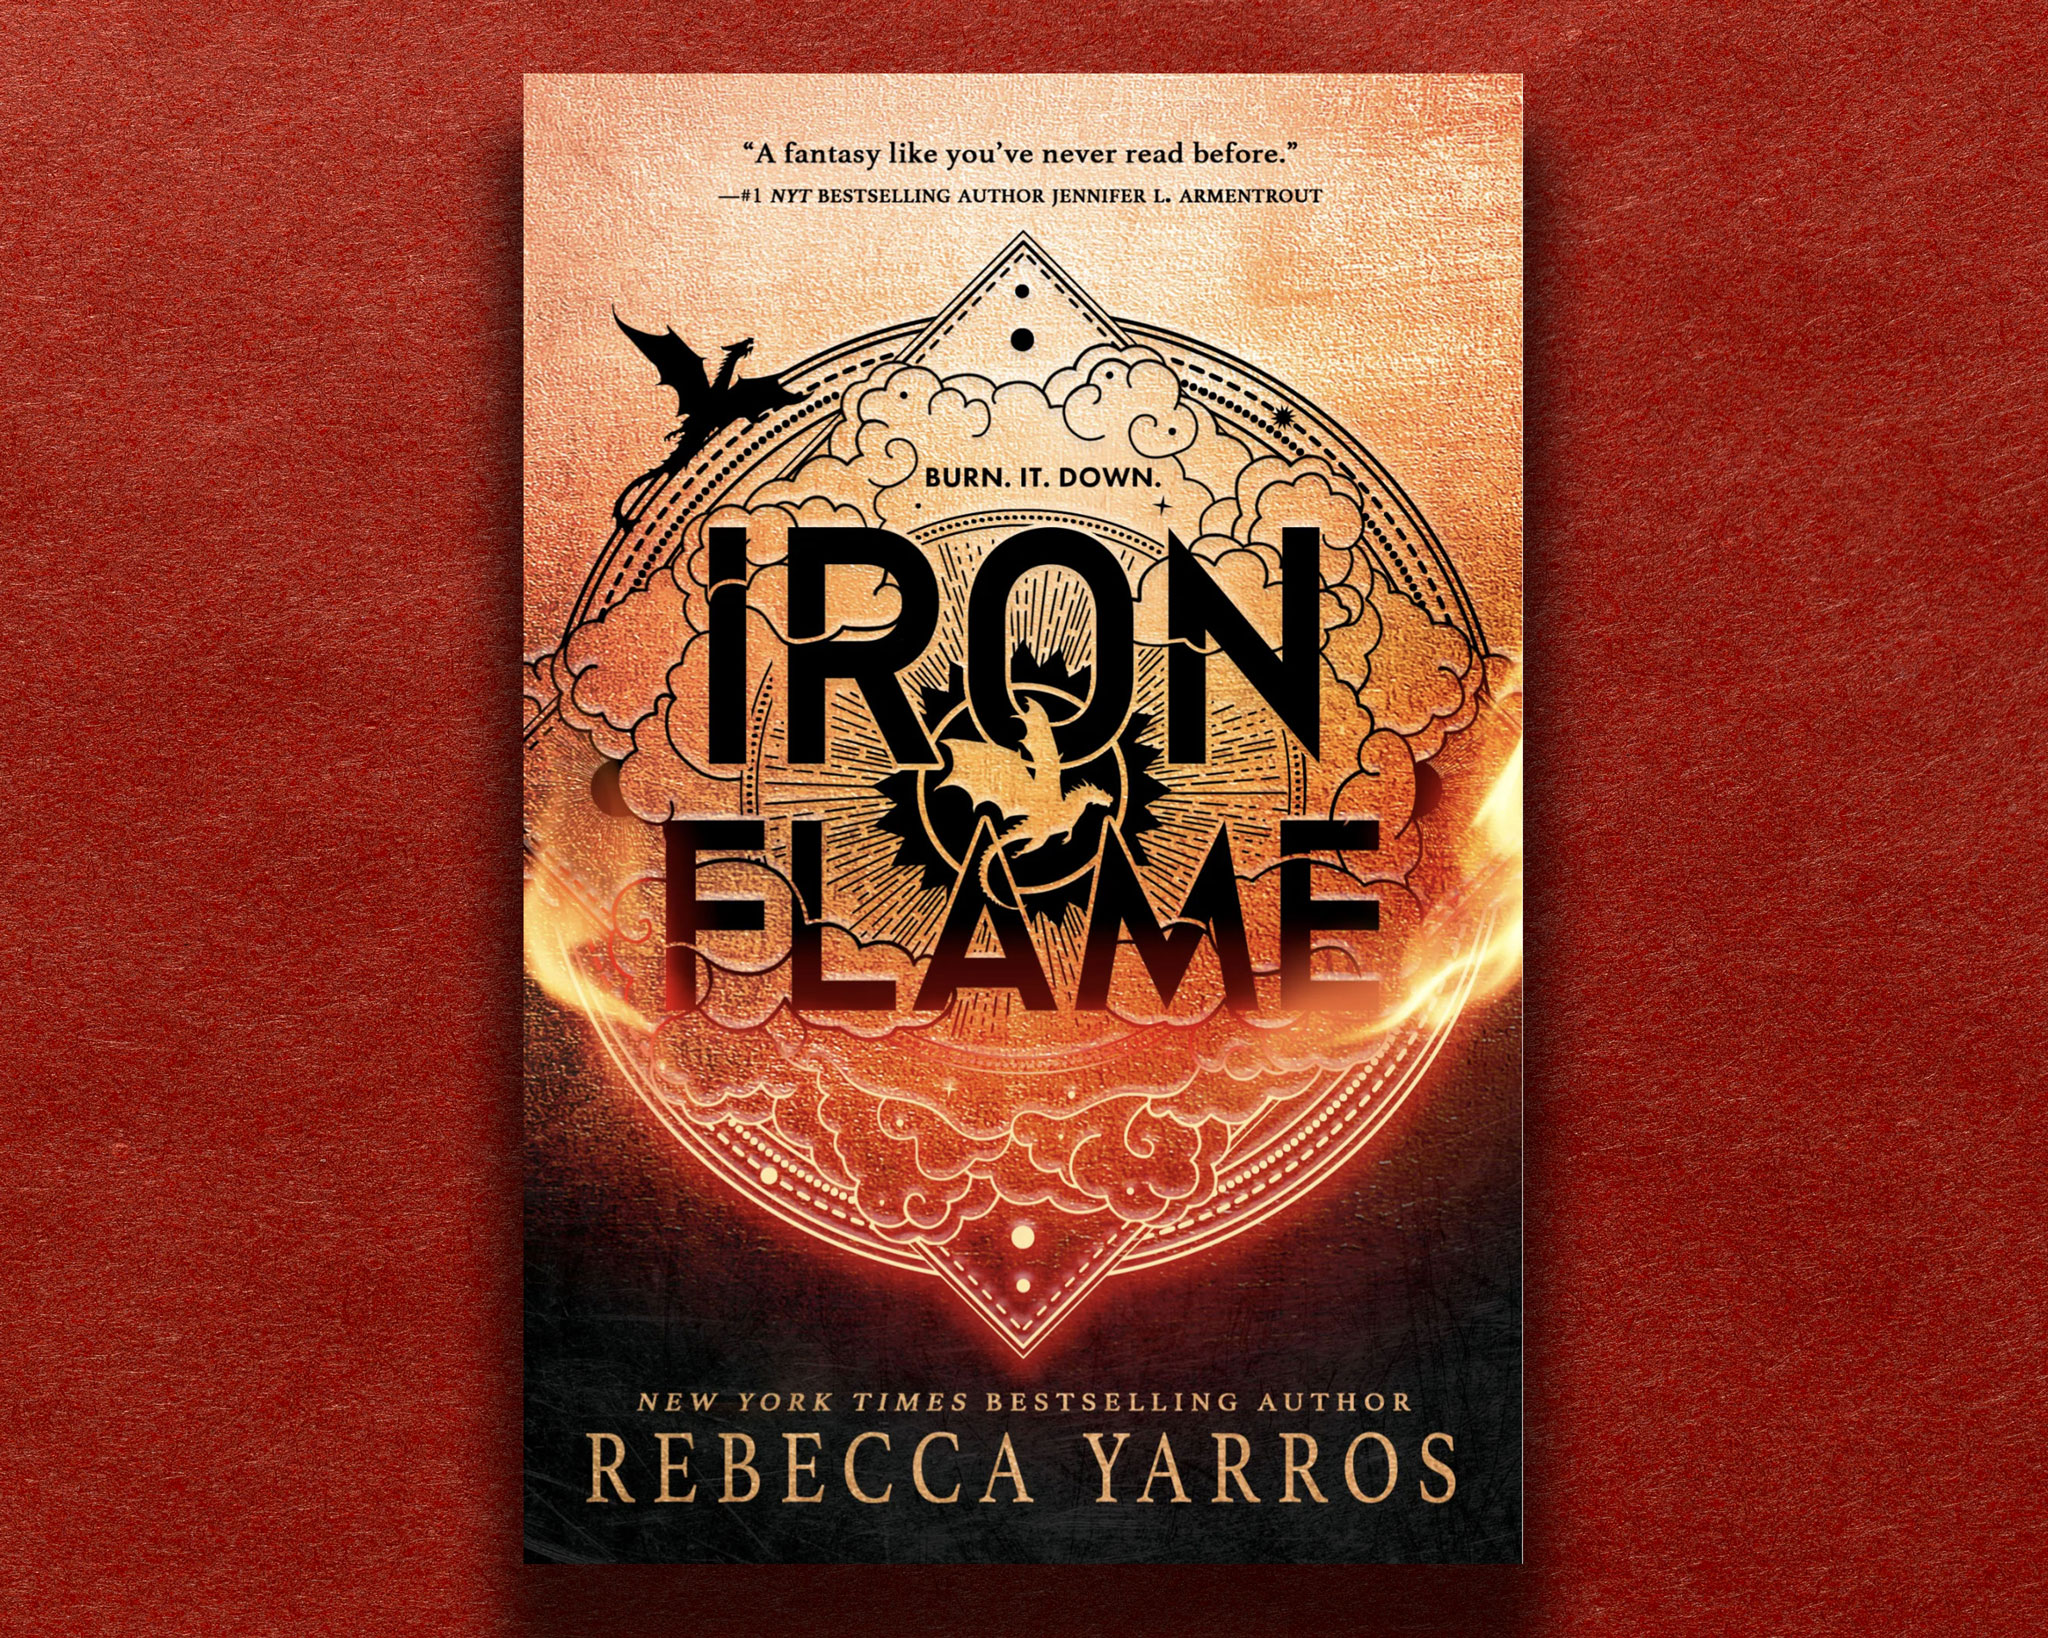 How Rebecca Yarros’ Iron Flame and Fourth Wing Became Huge | TIME